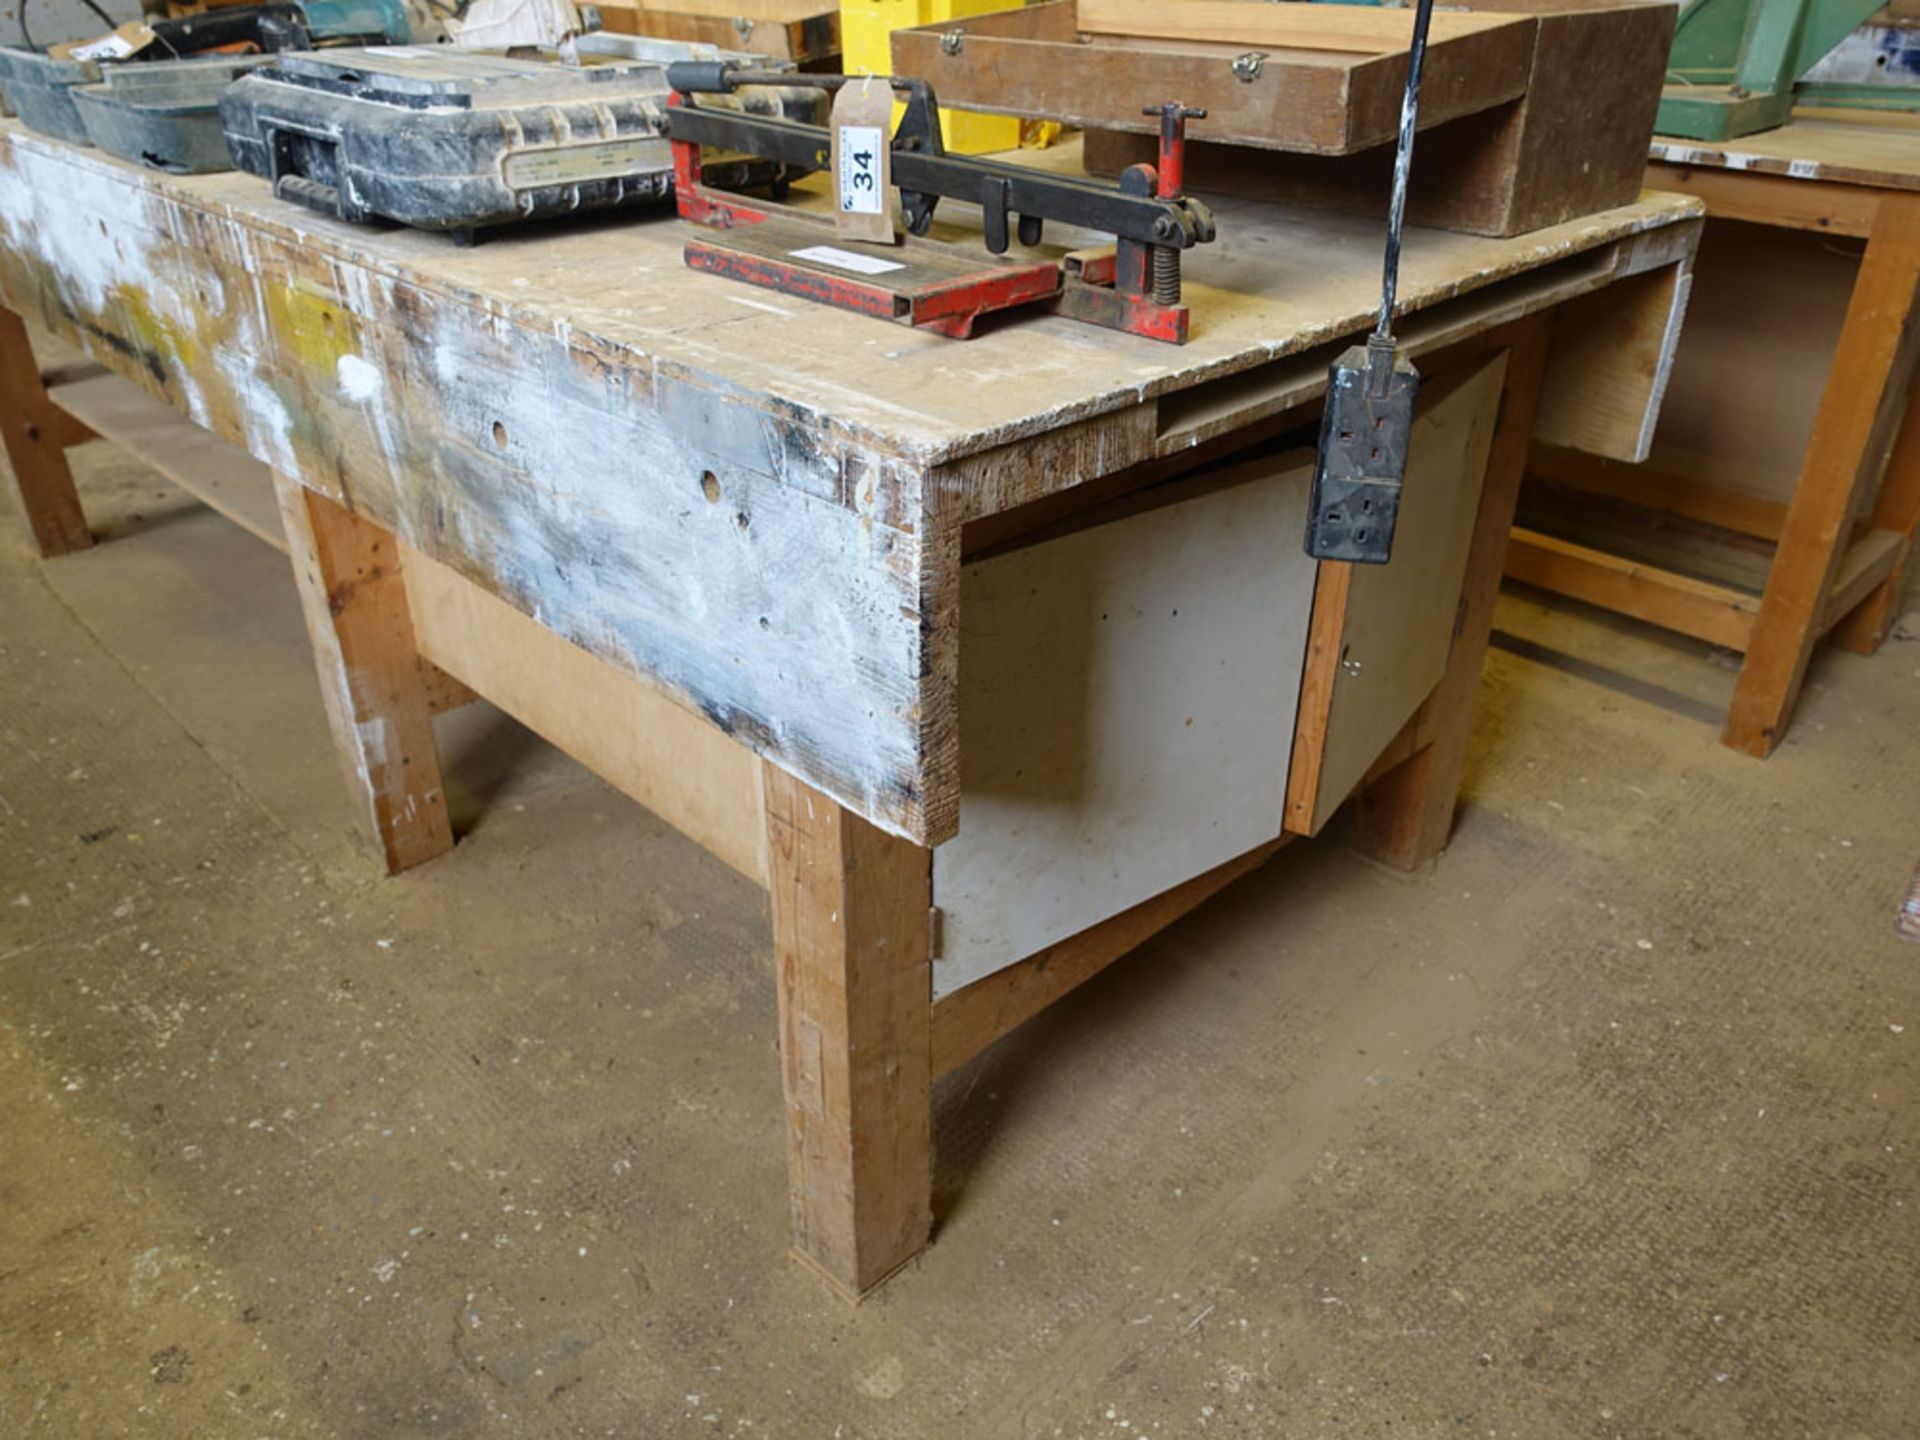 3 metre carpenters bench with 2 Record carpenters vices - Image 2 of 2